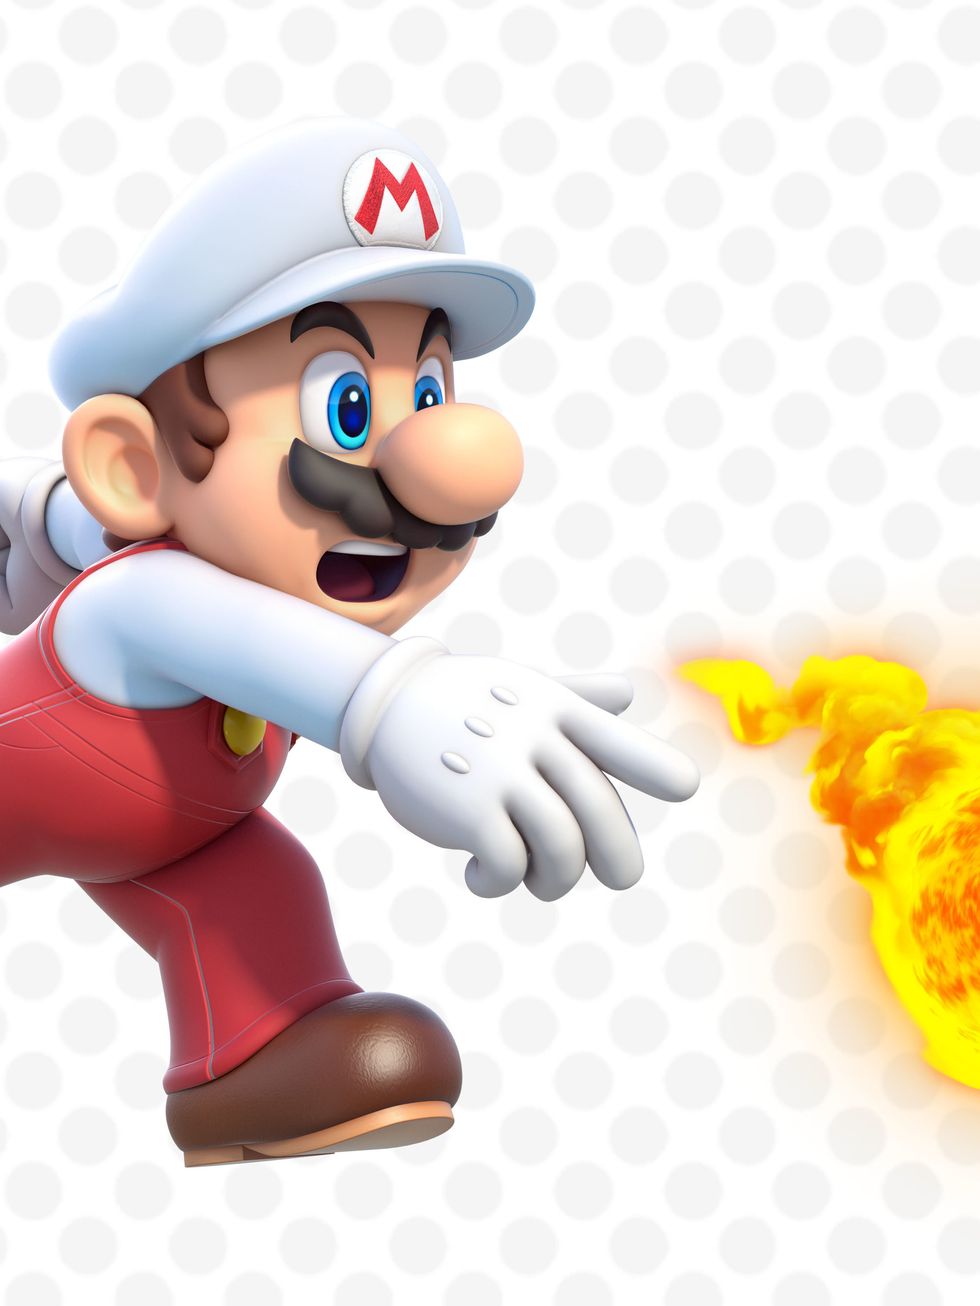 Finger, Animation, Animated cartoon, Toy, Pleased, Graphics, Mario, Fictional character, Gesture, Illustration, 